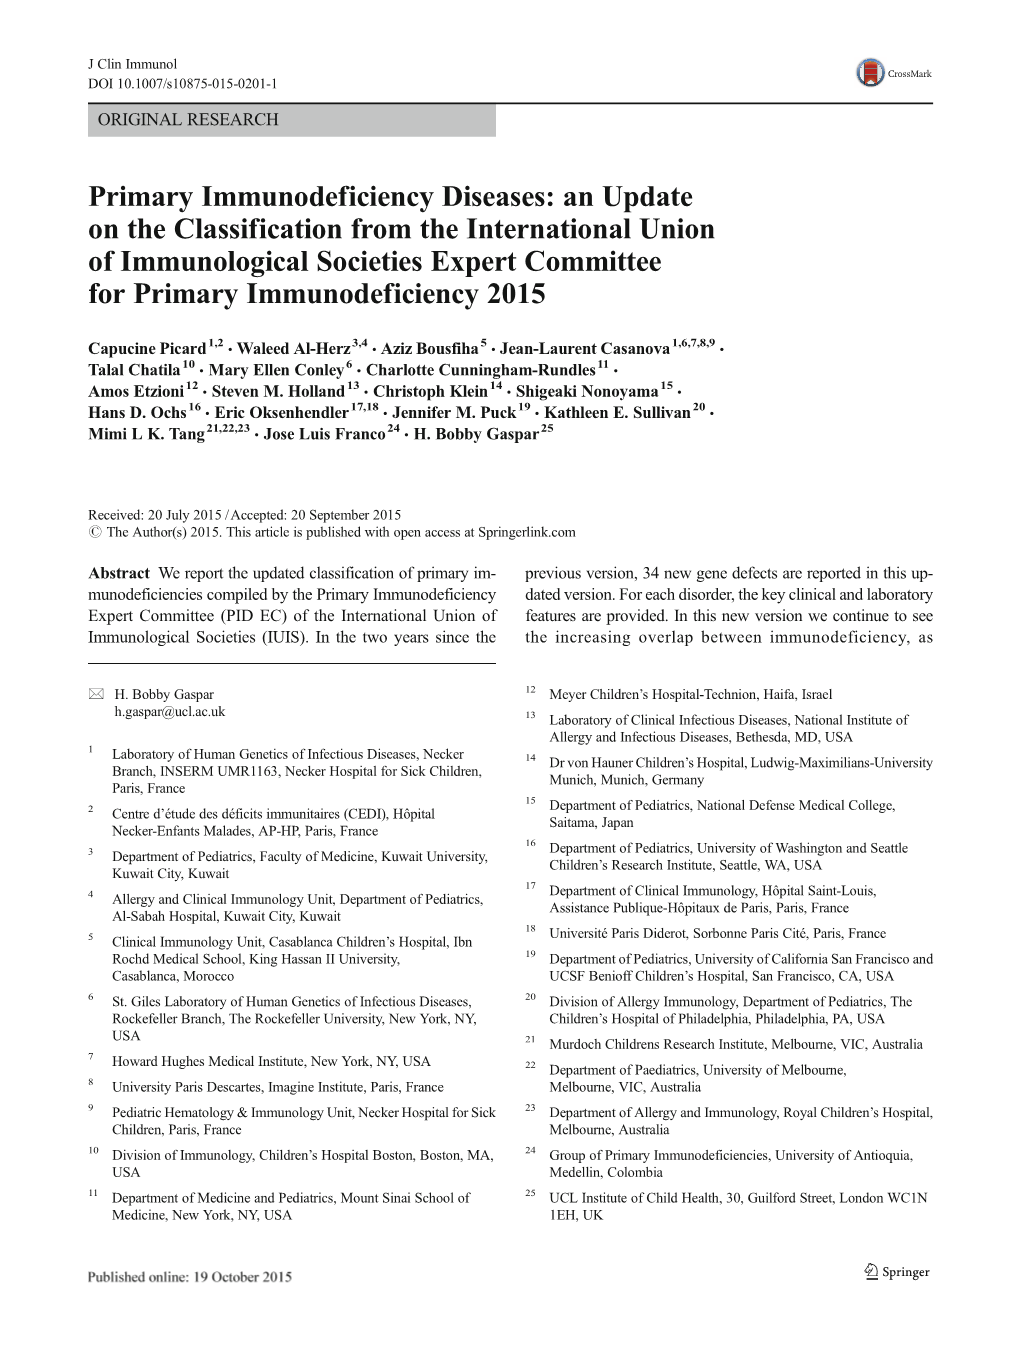 Primary Immunodeficiency Diseases: an Update on the Classification